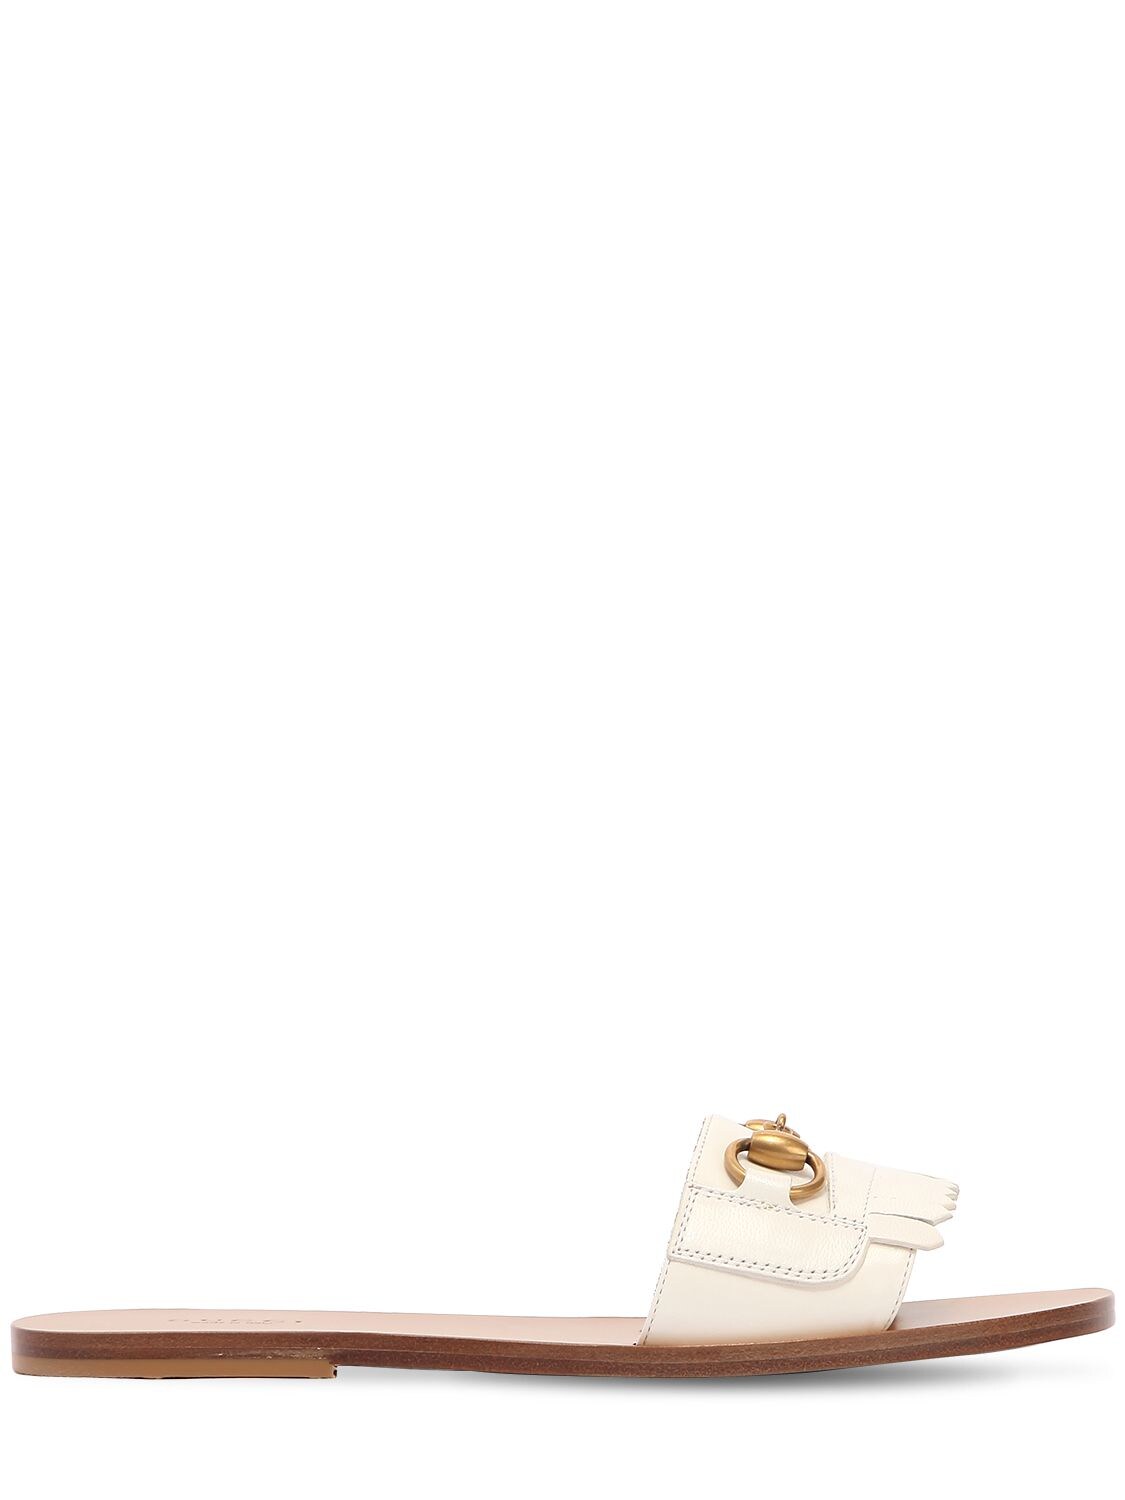 Gucci 10mm Varadero Leather Slide Sandals In Off White